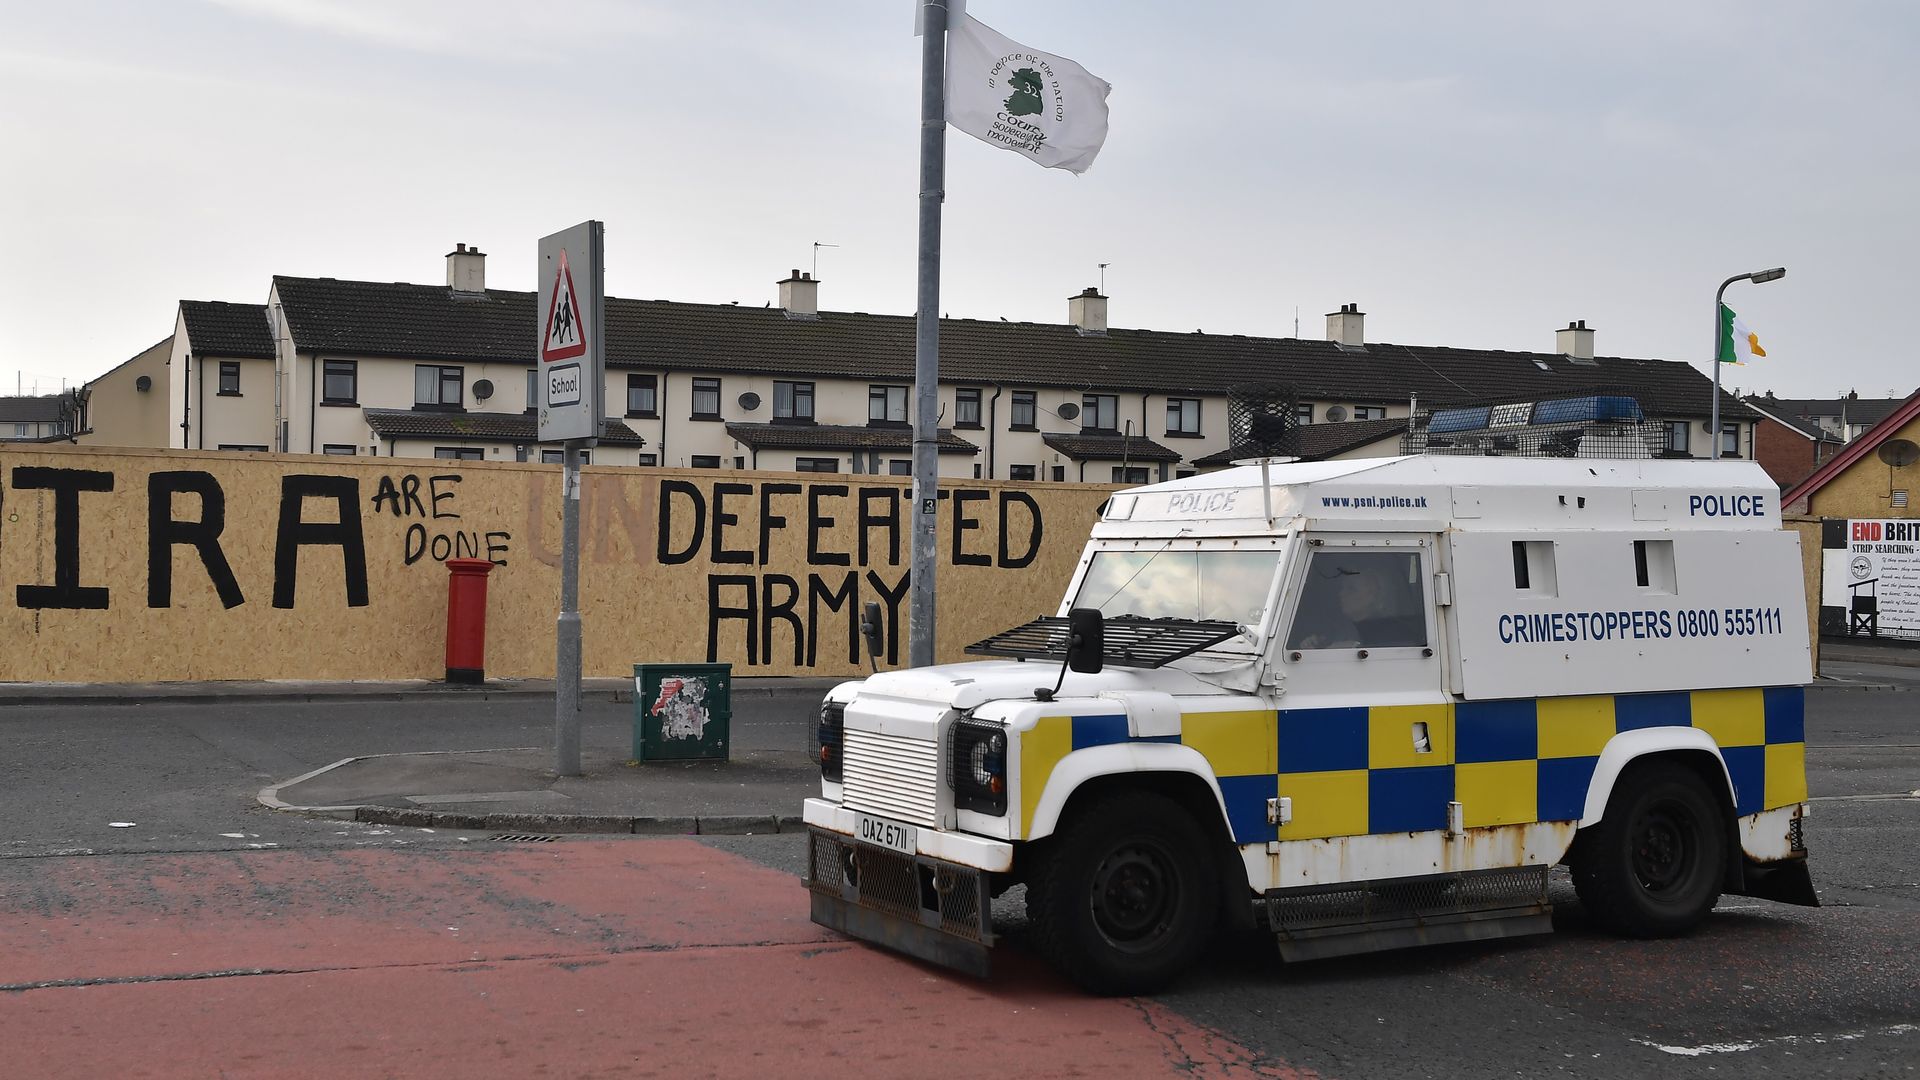 In this image, an ambulance is parked on a street with a wall behind it that reads "IRA are done: Defeated Army"